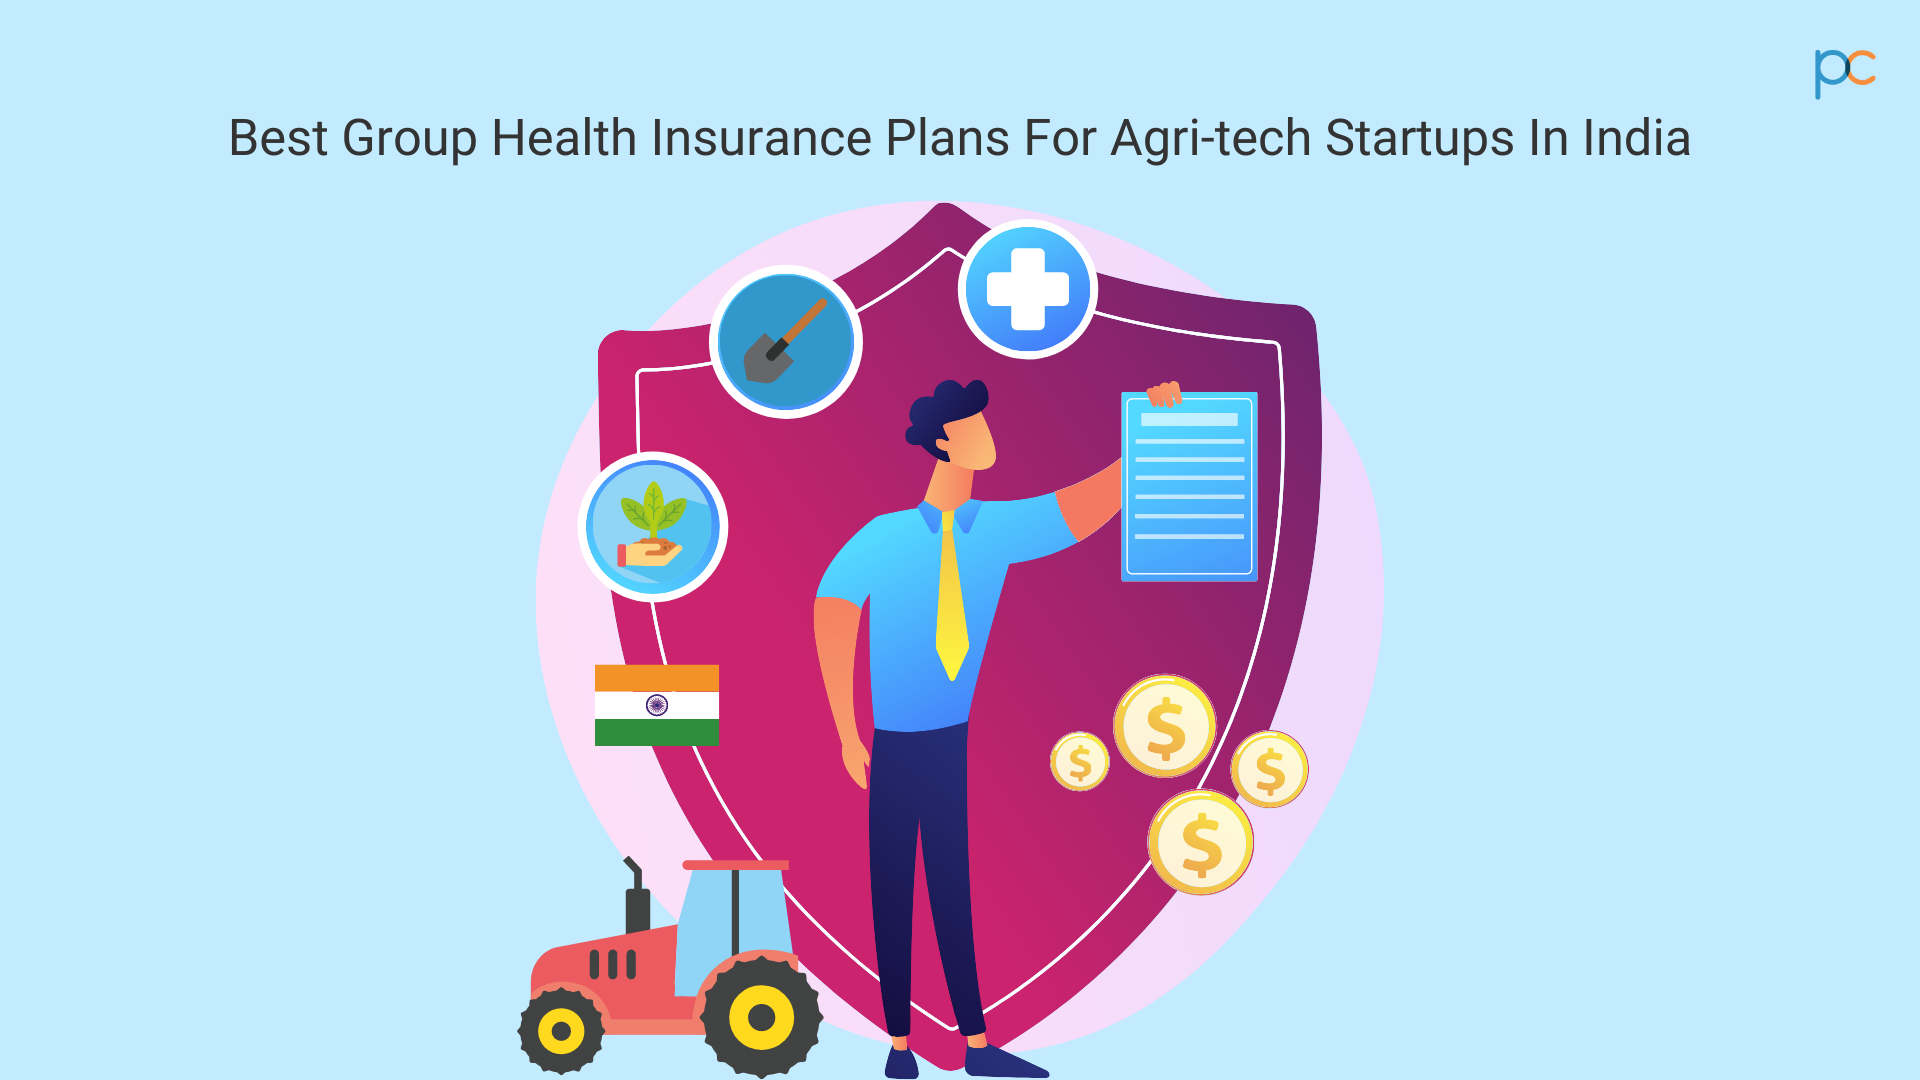 Best Group Health Insurance Plans For Agri tech Startups In India